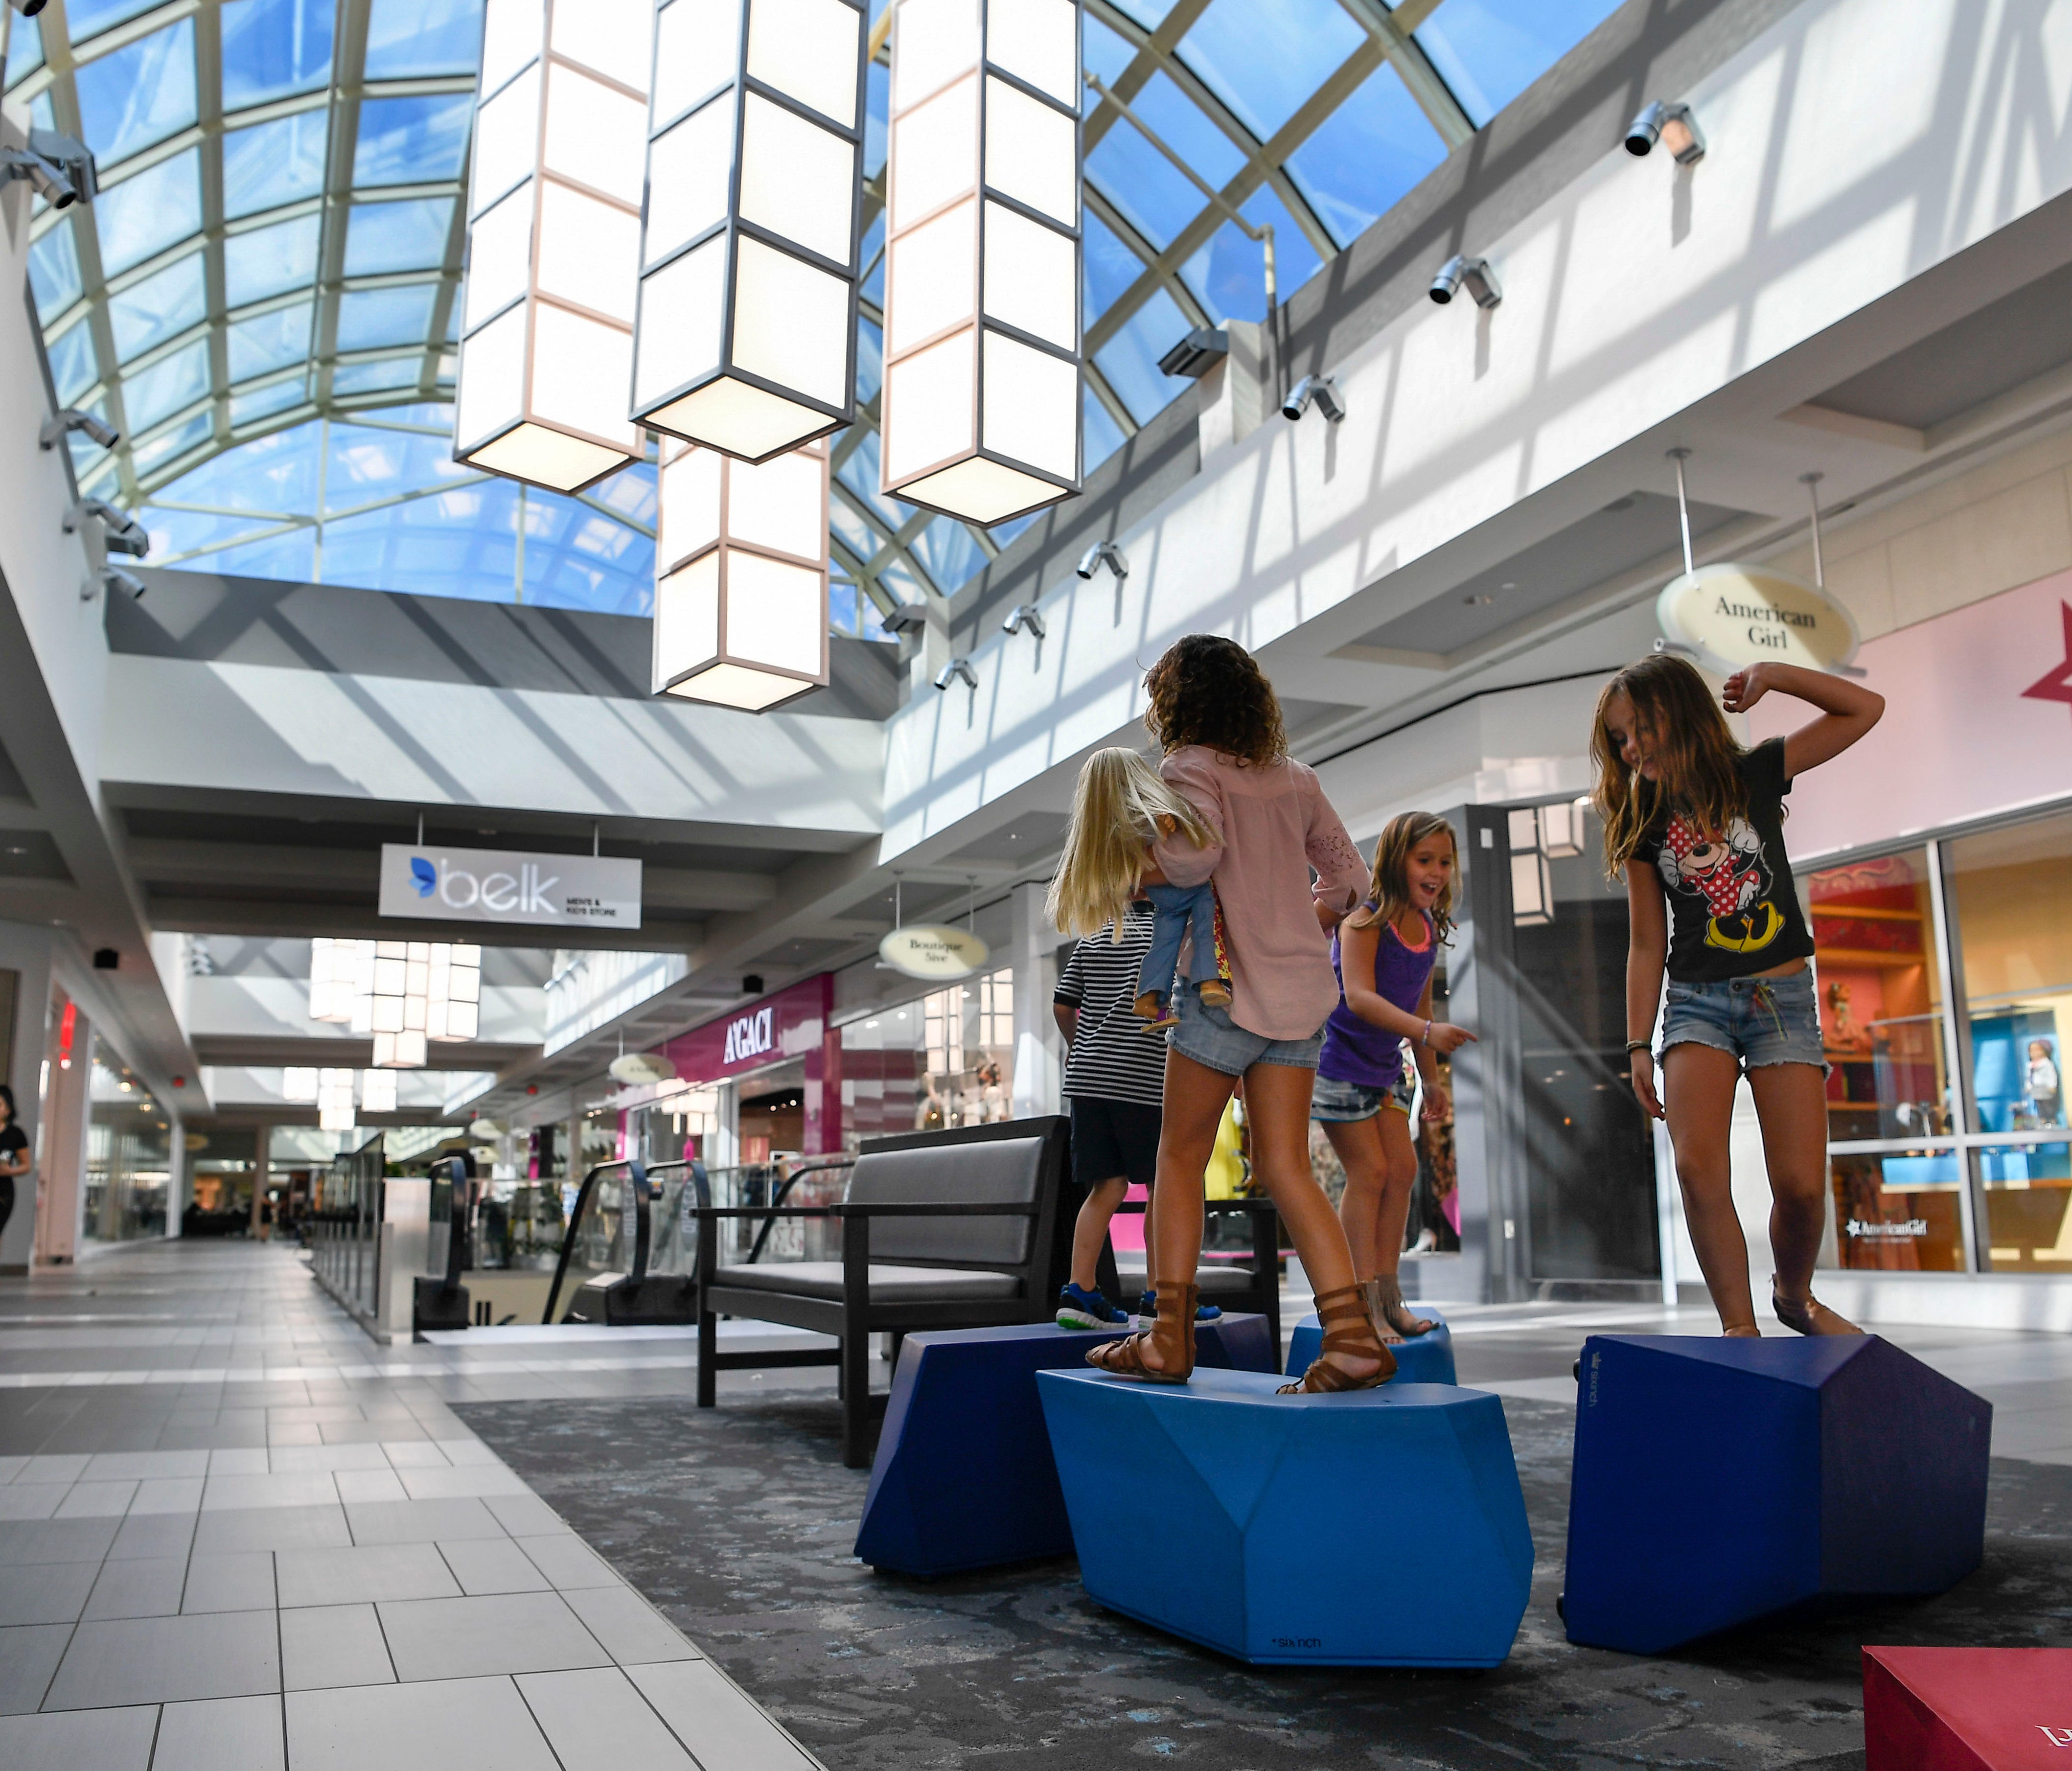 Children play after shopping at the American Girl Shop at the Cool Springs Galleria in Franklin, Tenn.